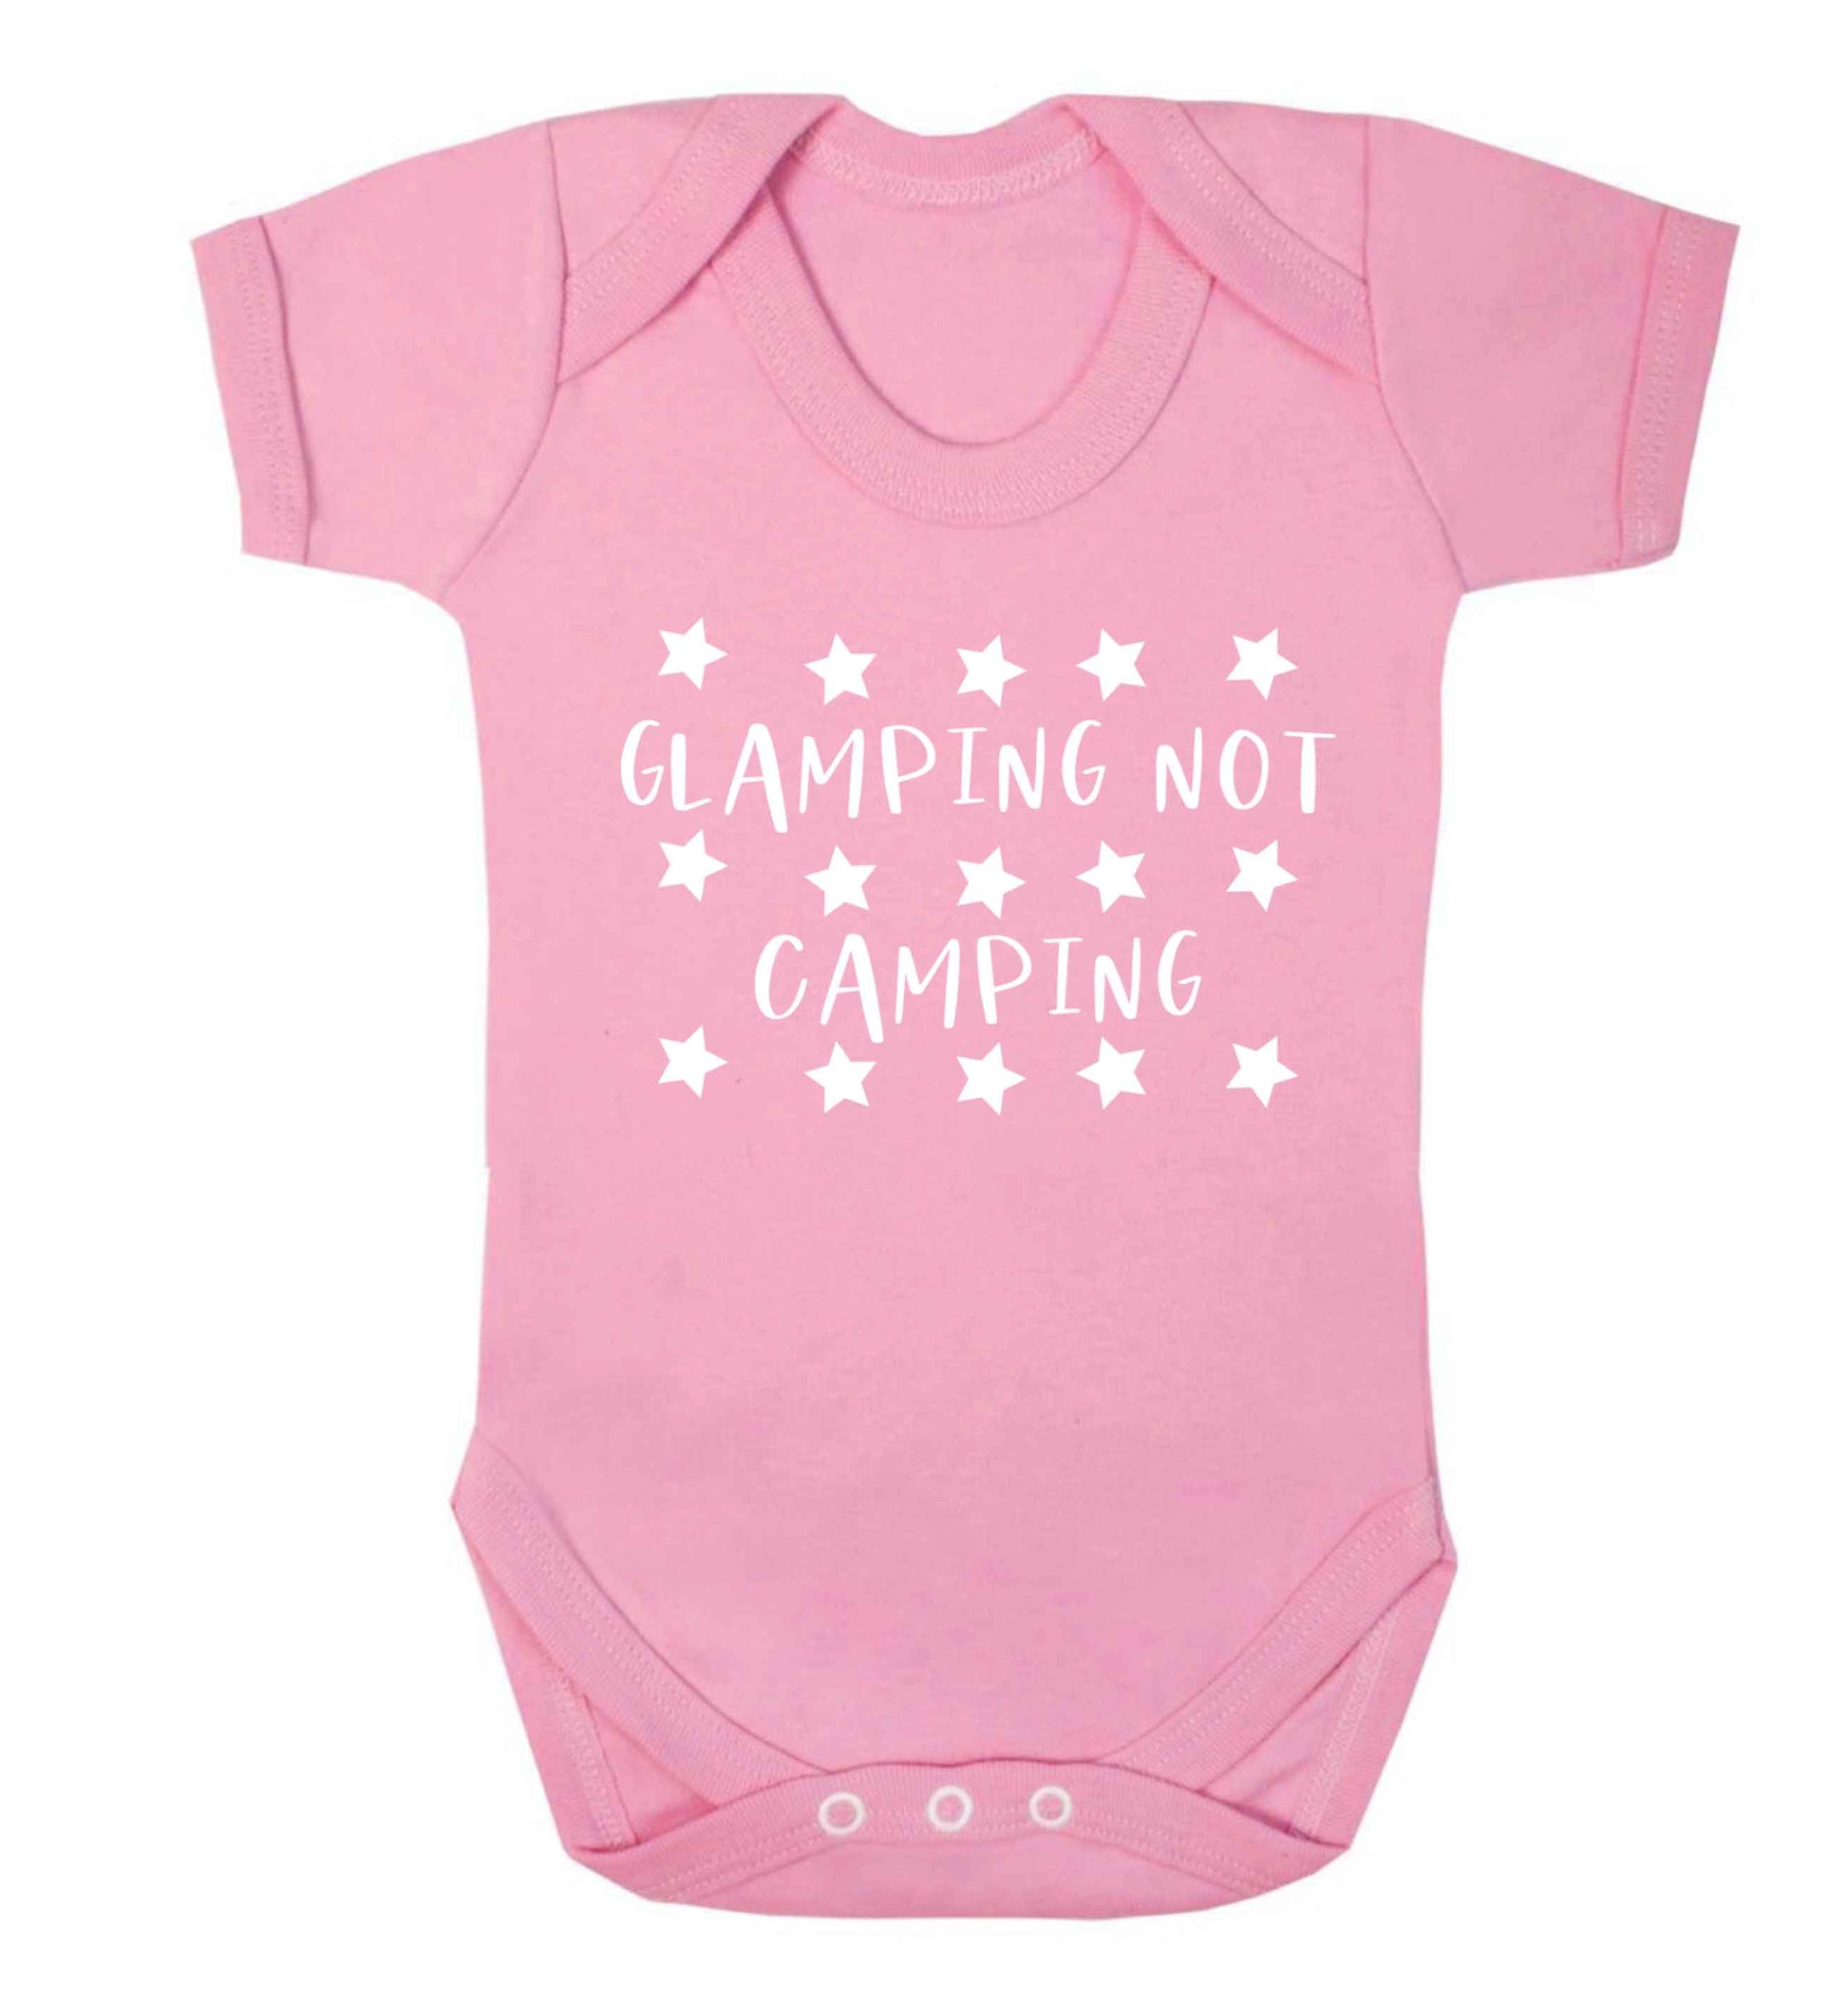 Glamping not camping Baby Vest pale pink 18-24 months